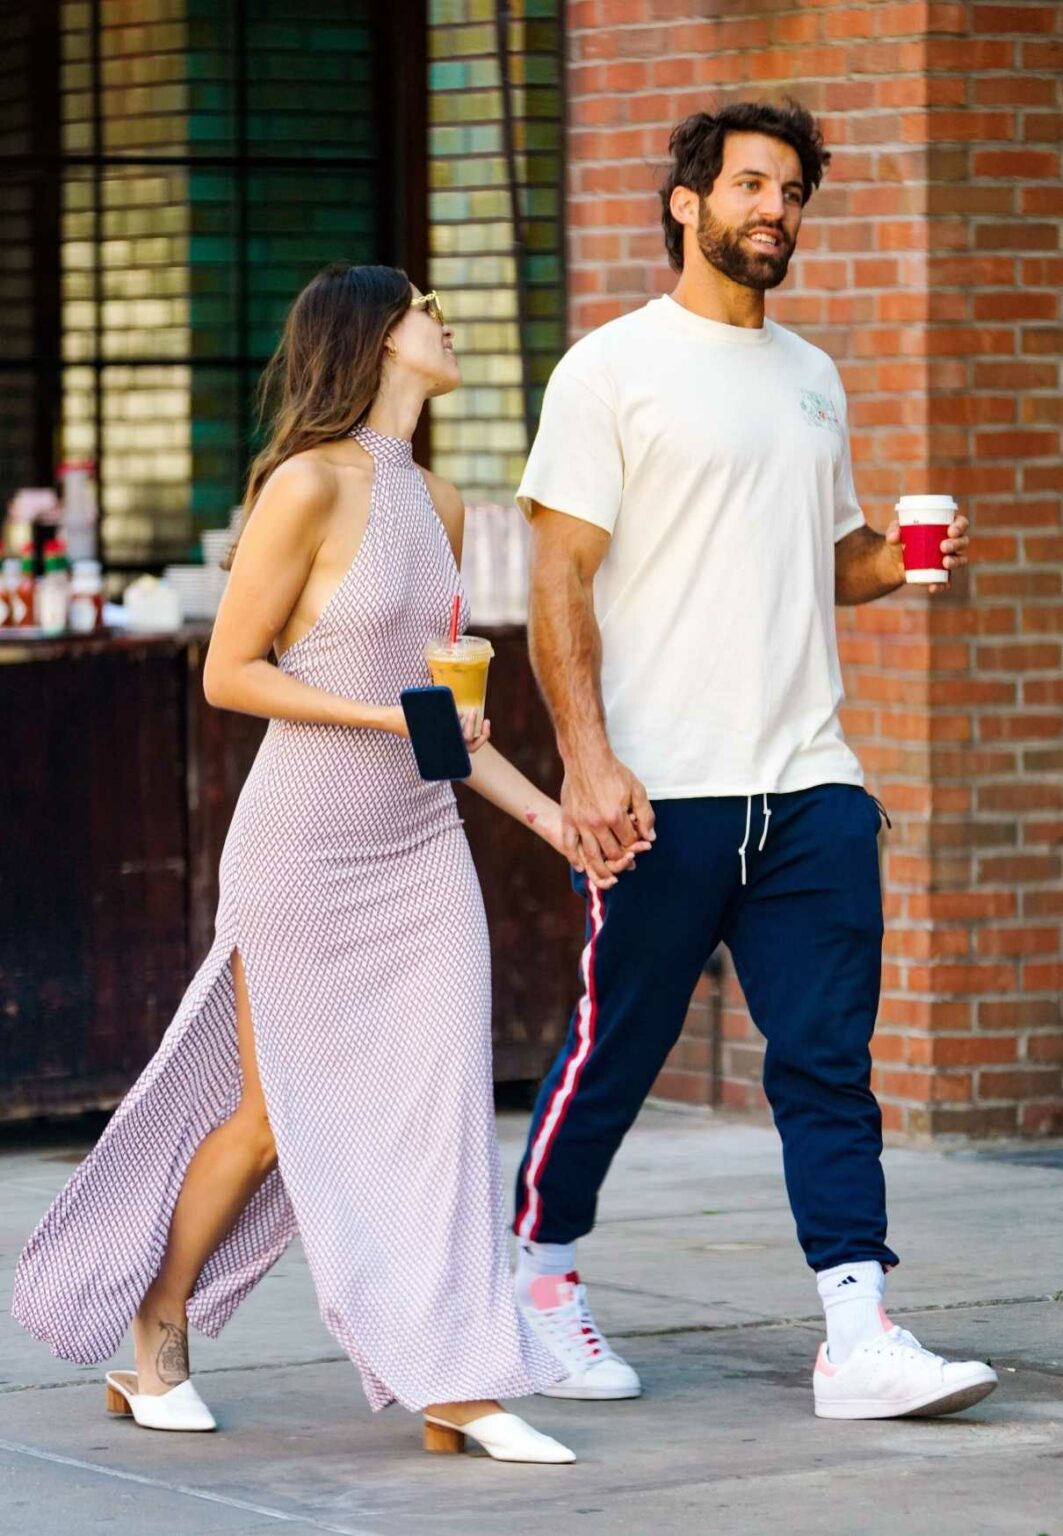 Eiza Gonzalez In A Purple Dress Was Seen Out With Paul Rabil In New 1938